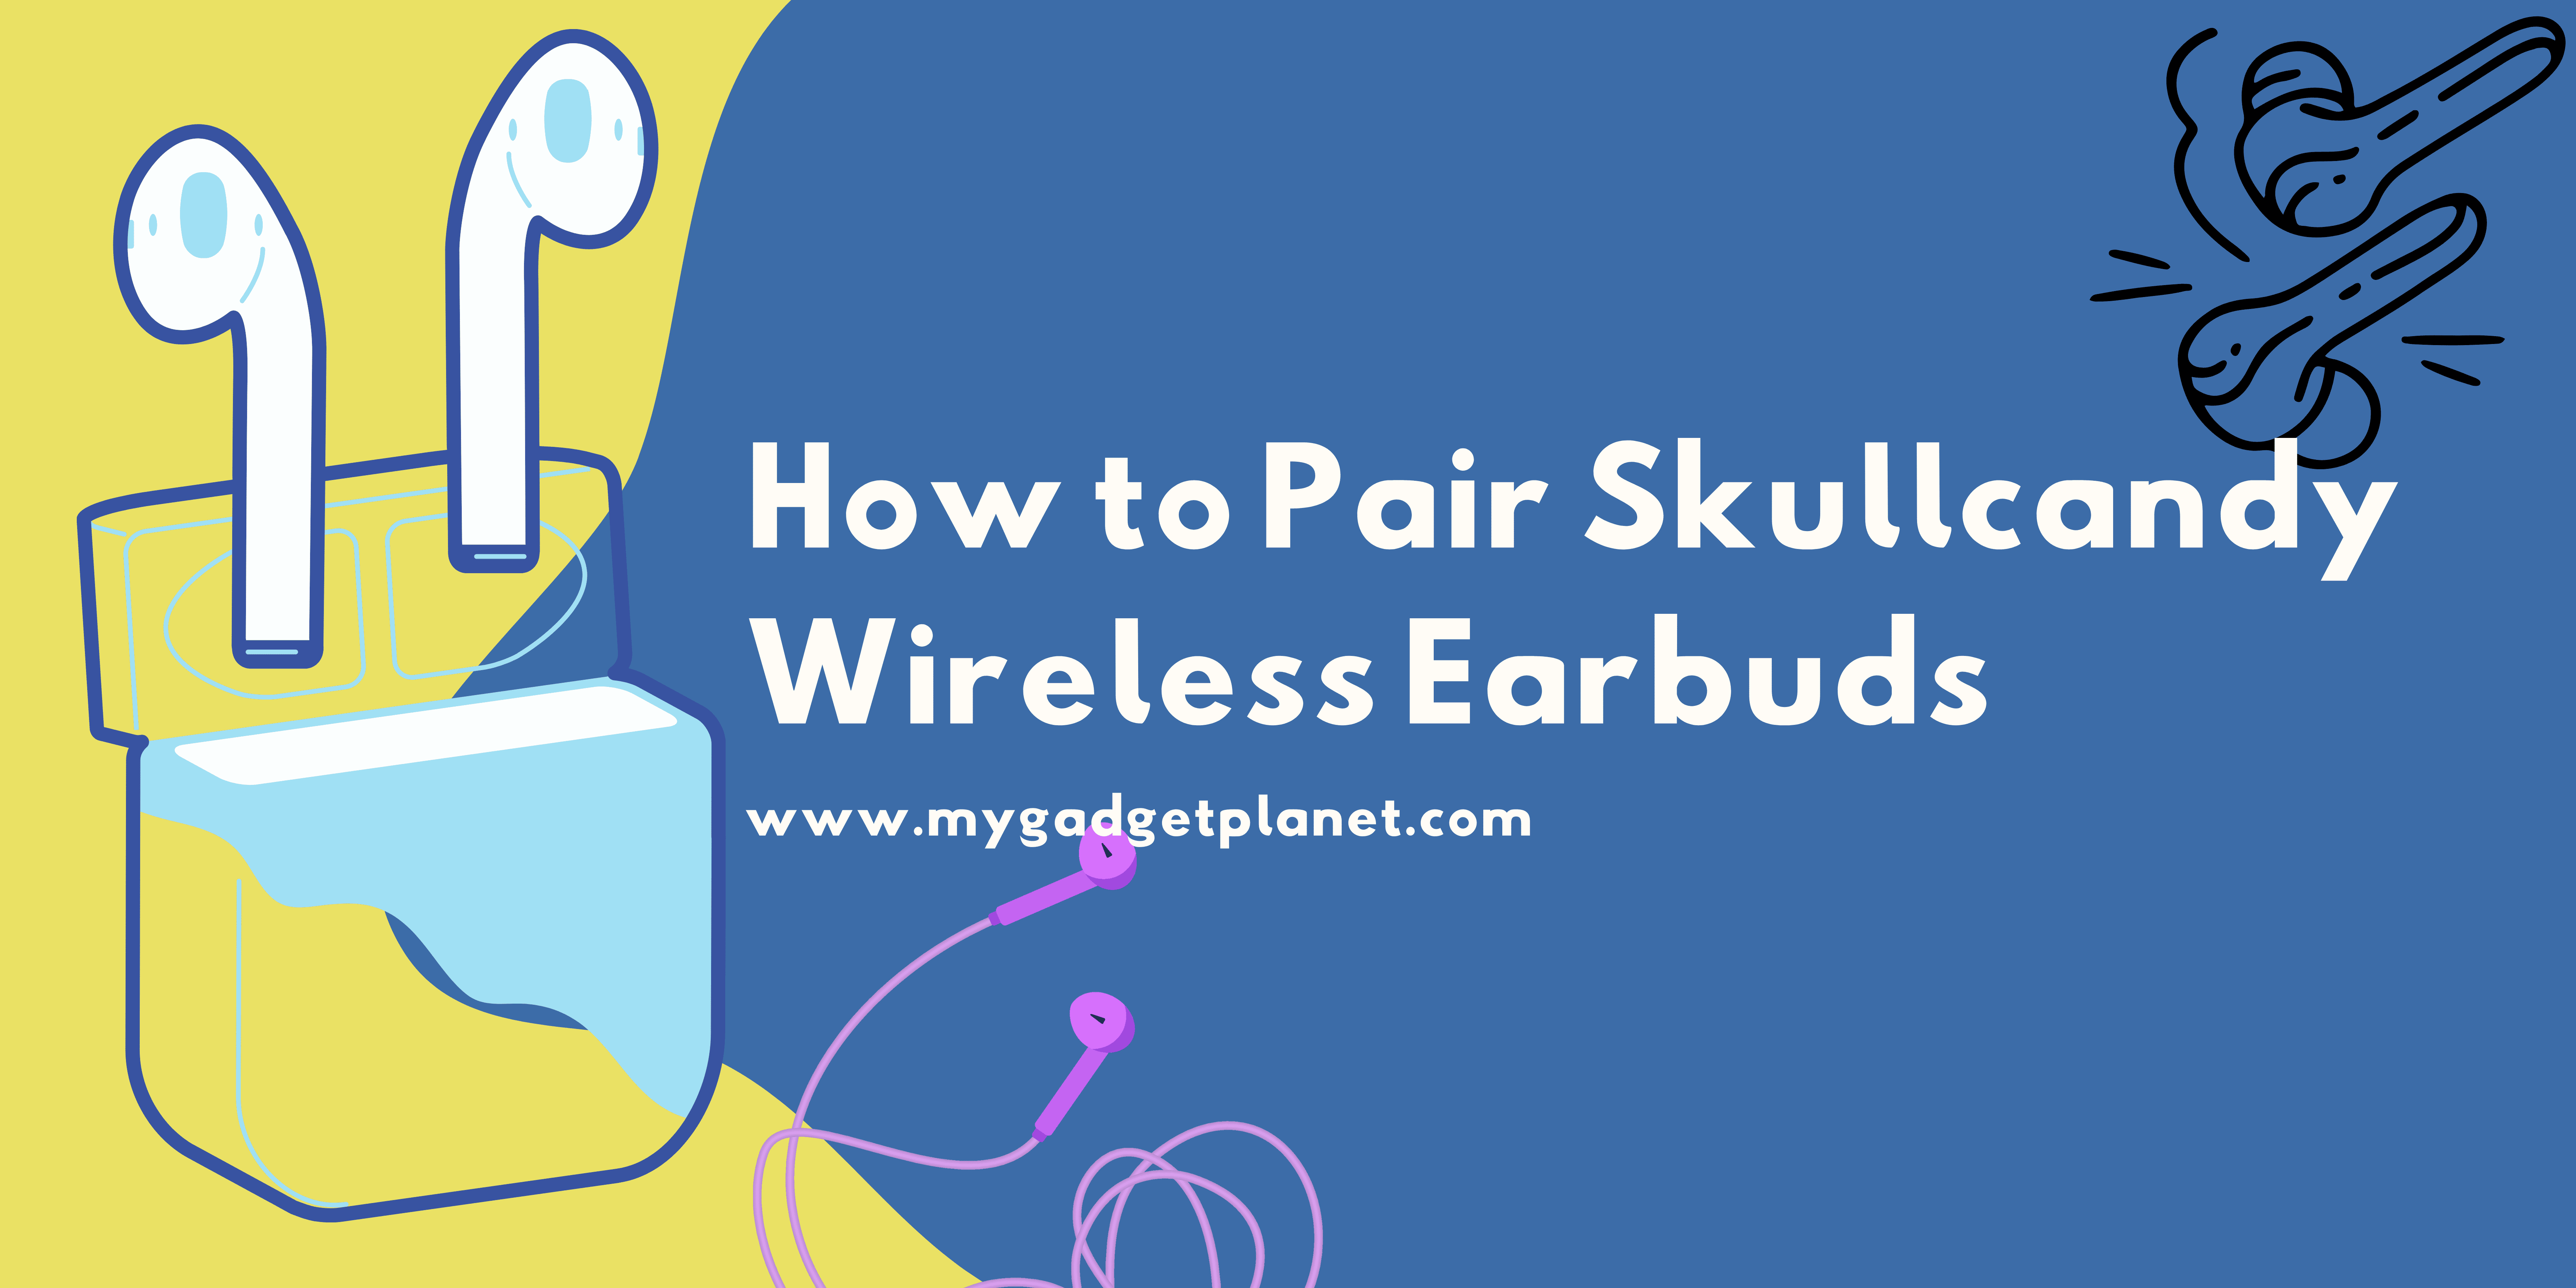 How To Pair Skullcandy Wirless Earbuds